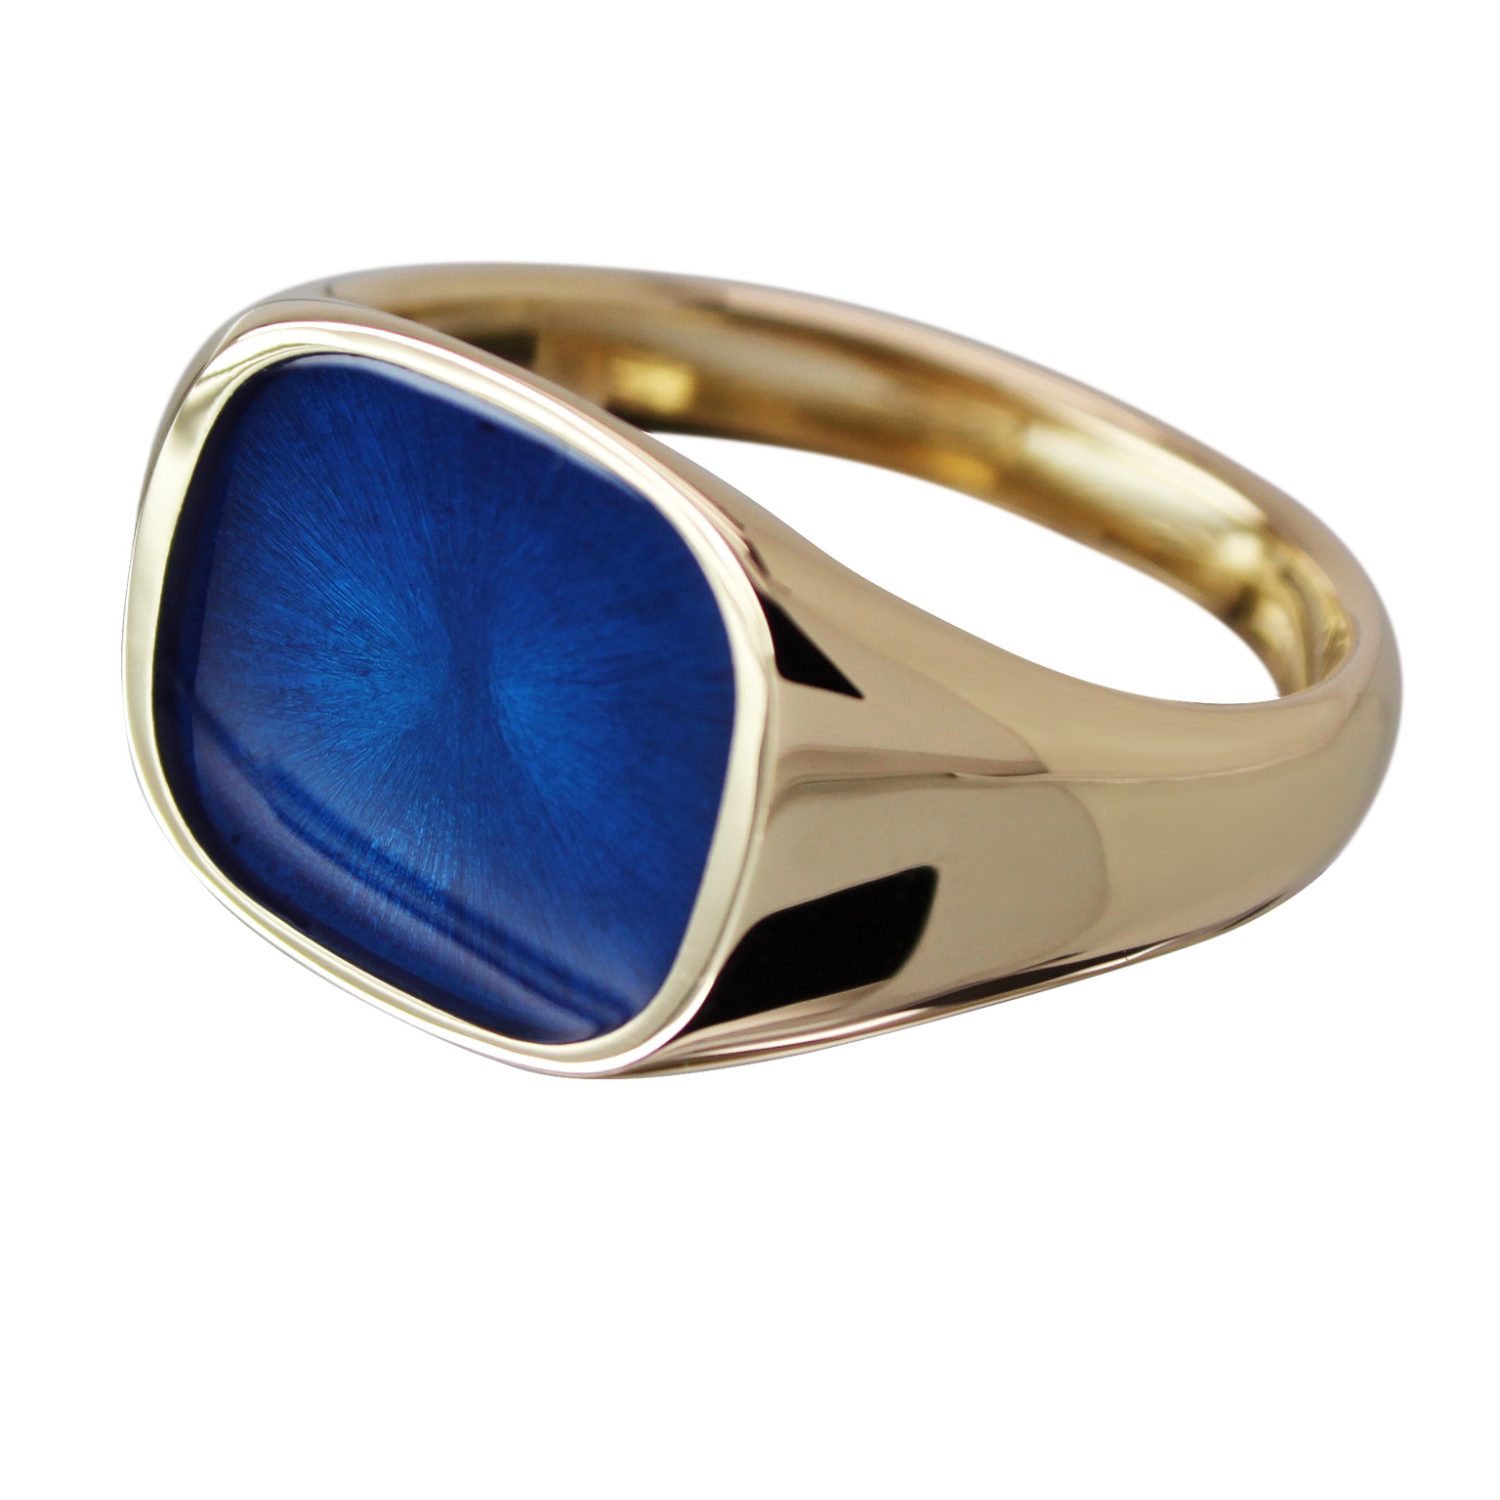 Blue and gold Signet Rings